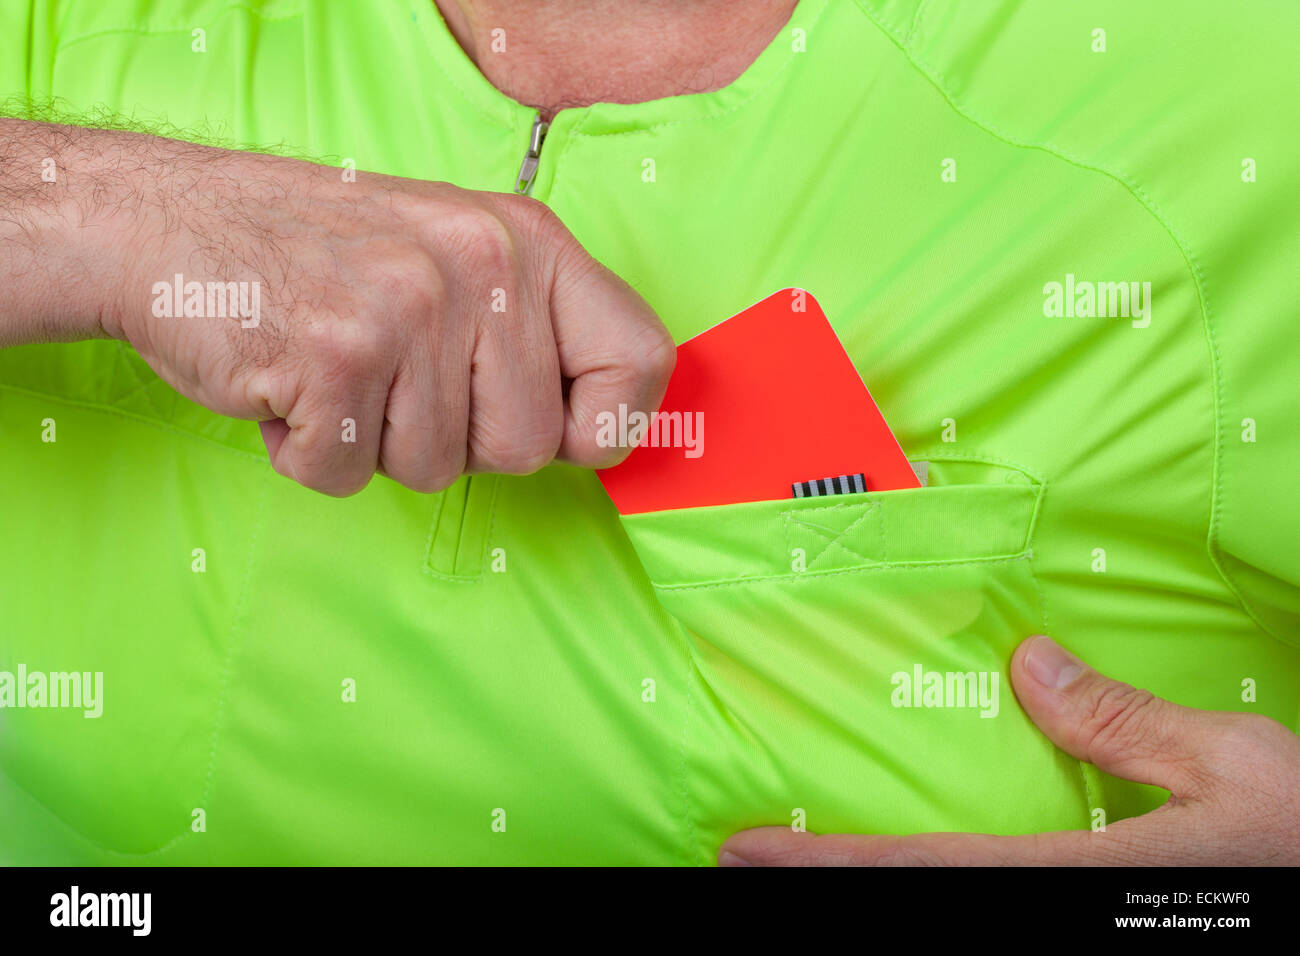 Referee whips out a red card from his pocket. Stock Photo